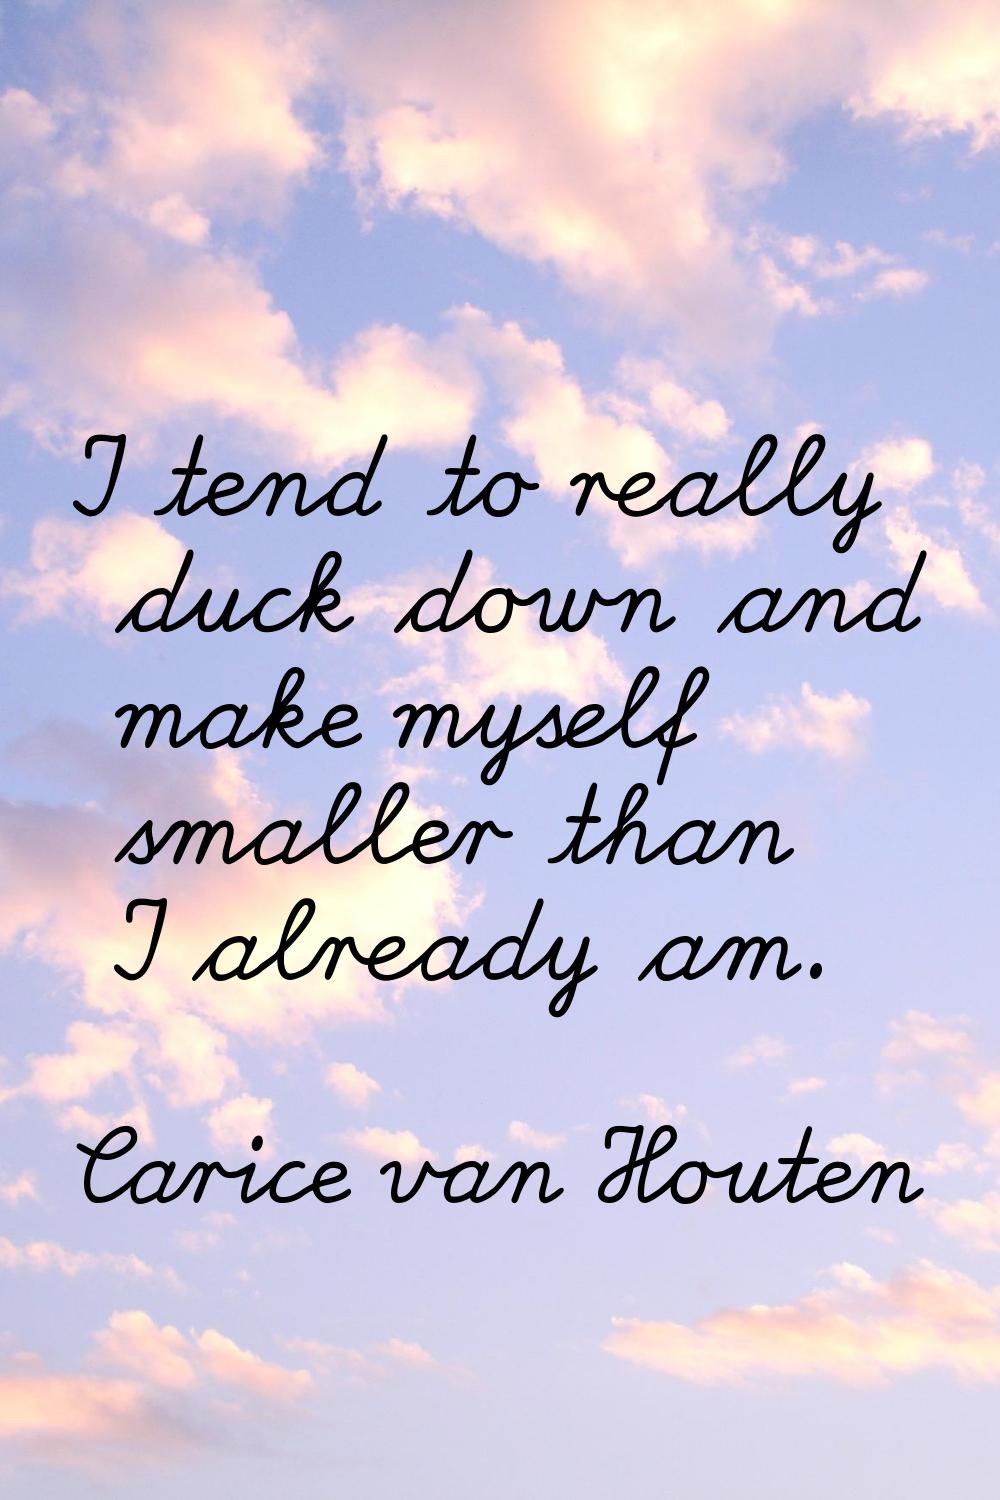 I tend to really duck down and make myself smaller than I already am.